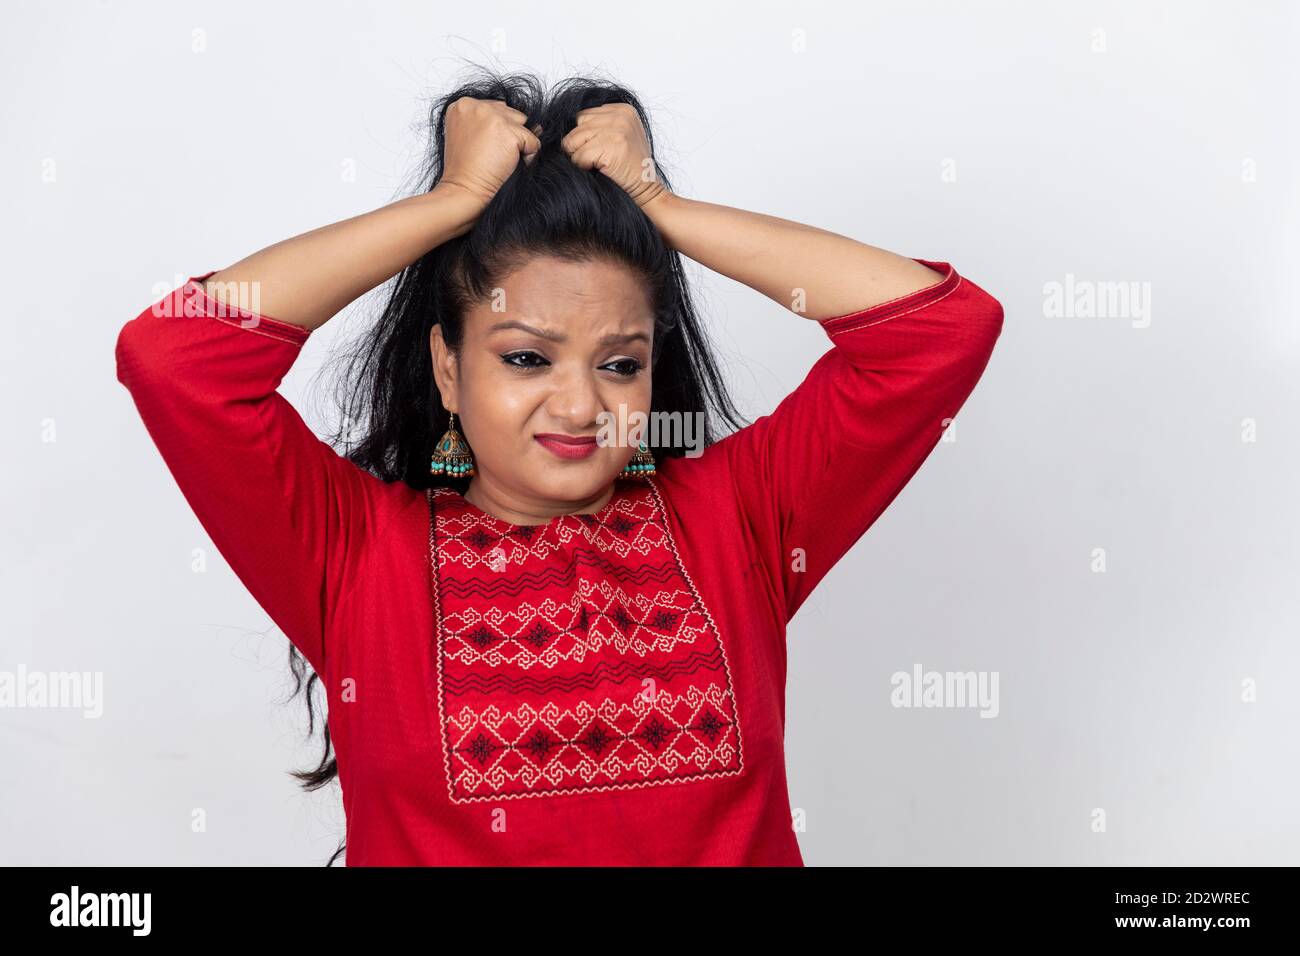 Portrait Of Indian Woman With Her Fingers In Her Long Hair And Pulling At Them Angry And